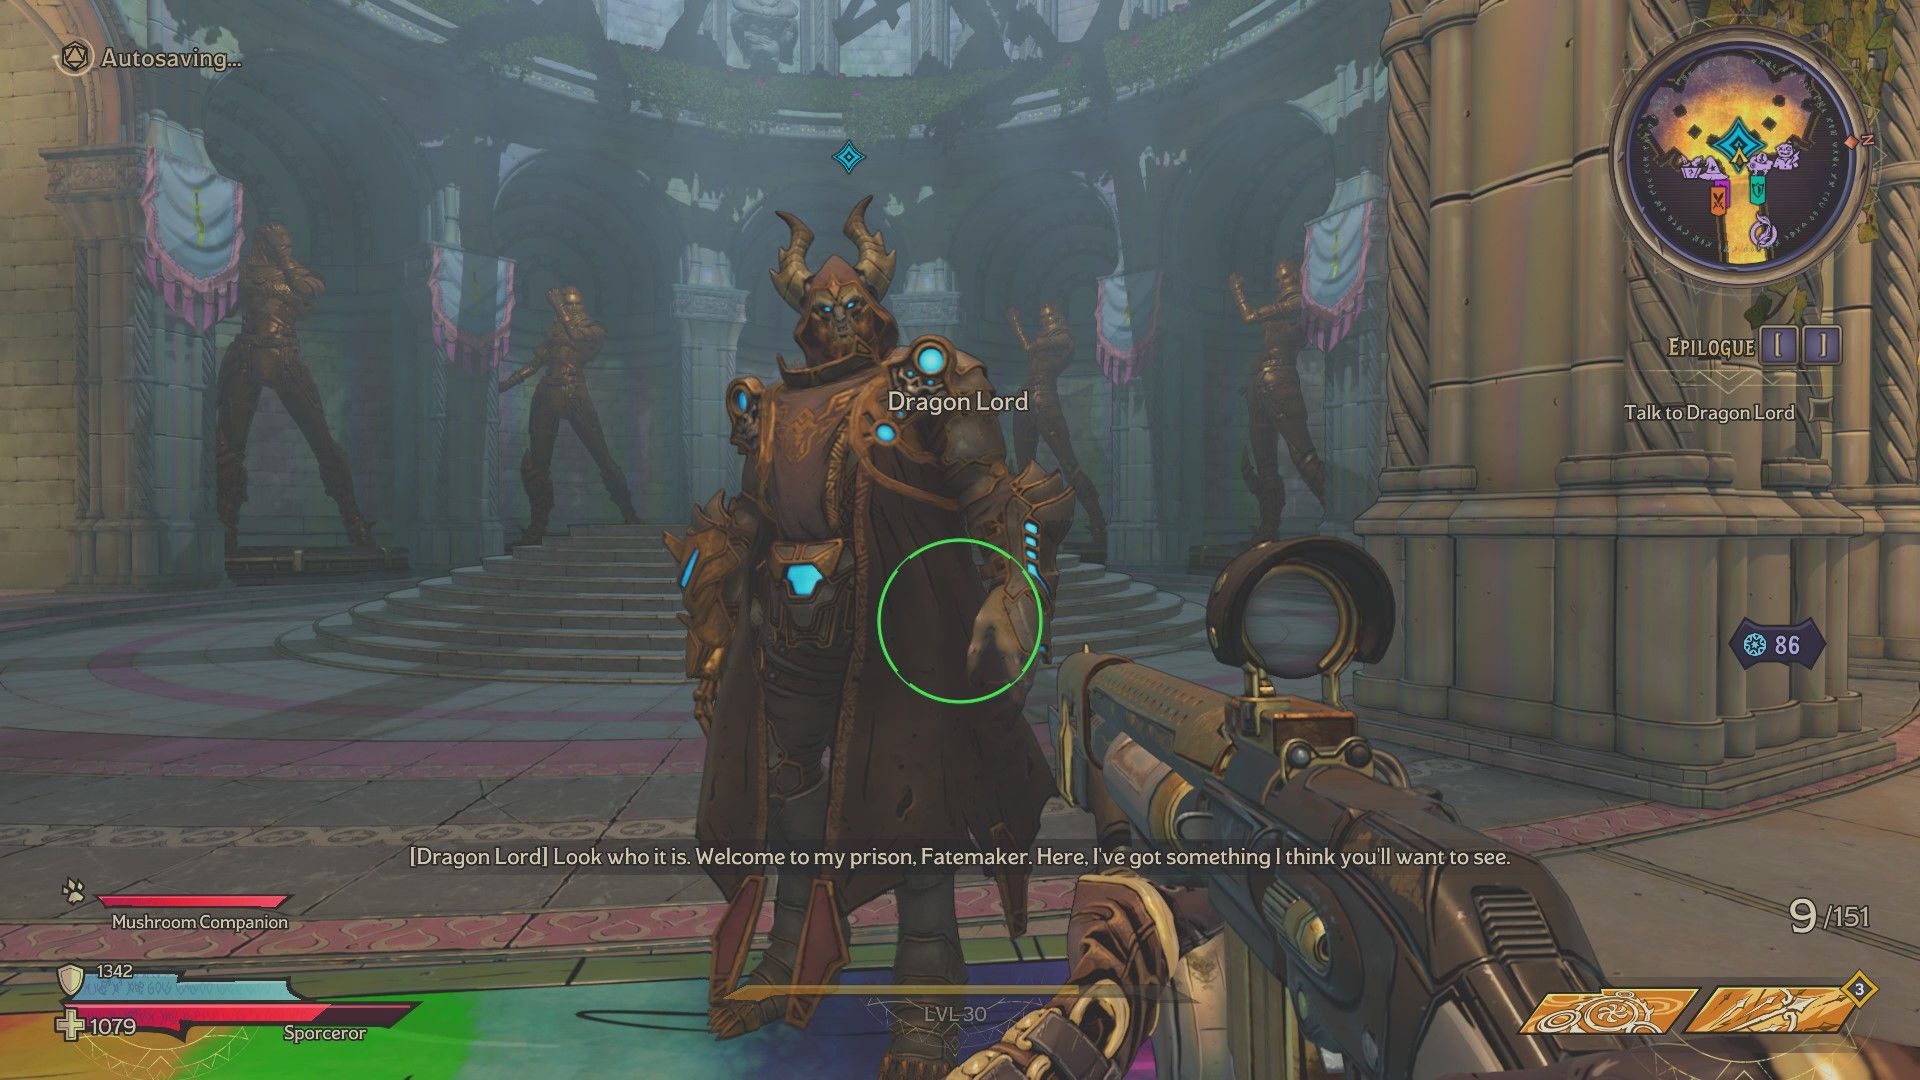 The Dragon Lord stands in the Chaos Chamber talking to the player about how it works